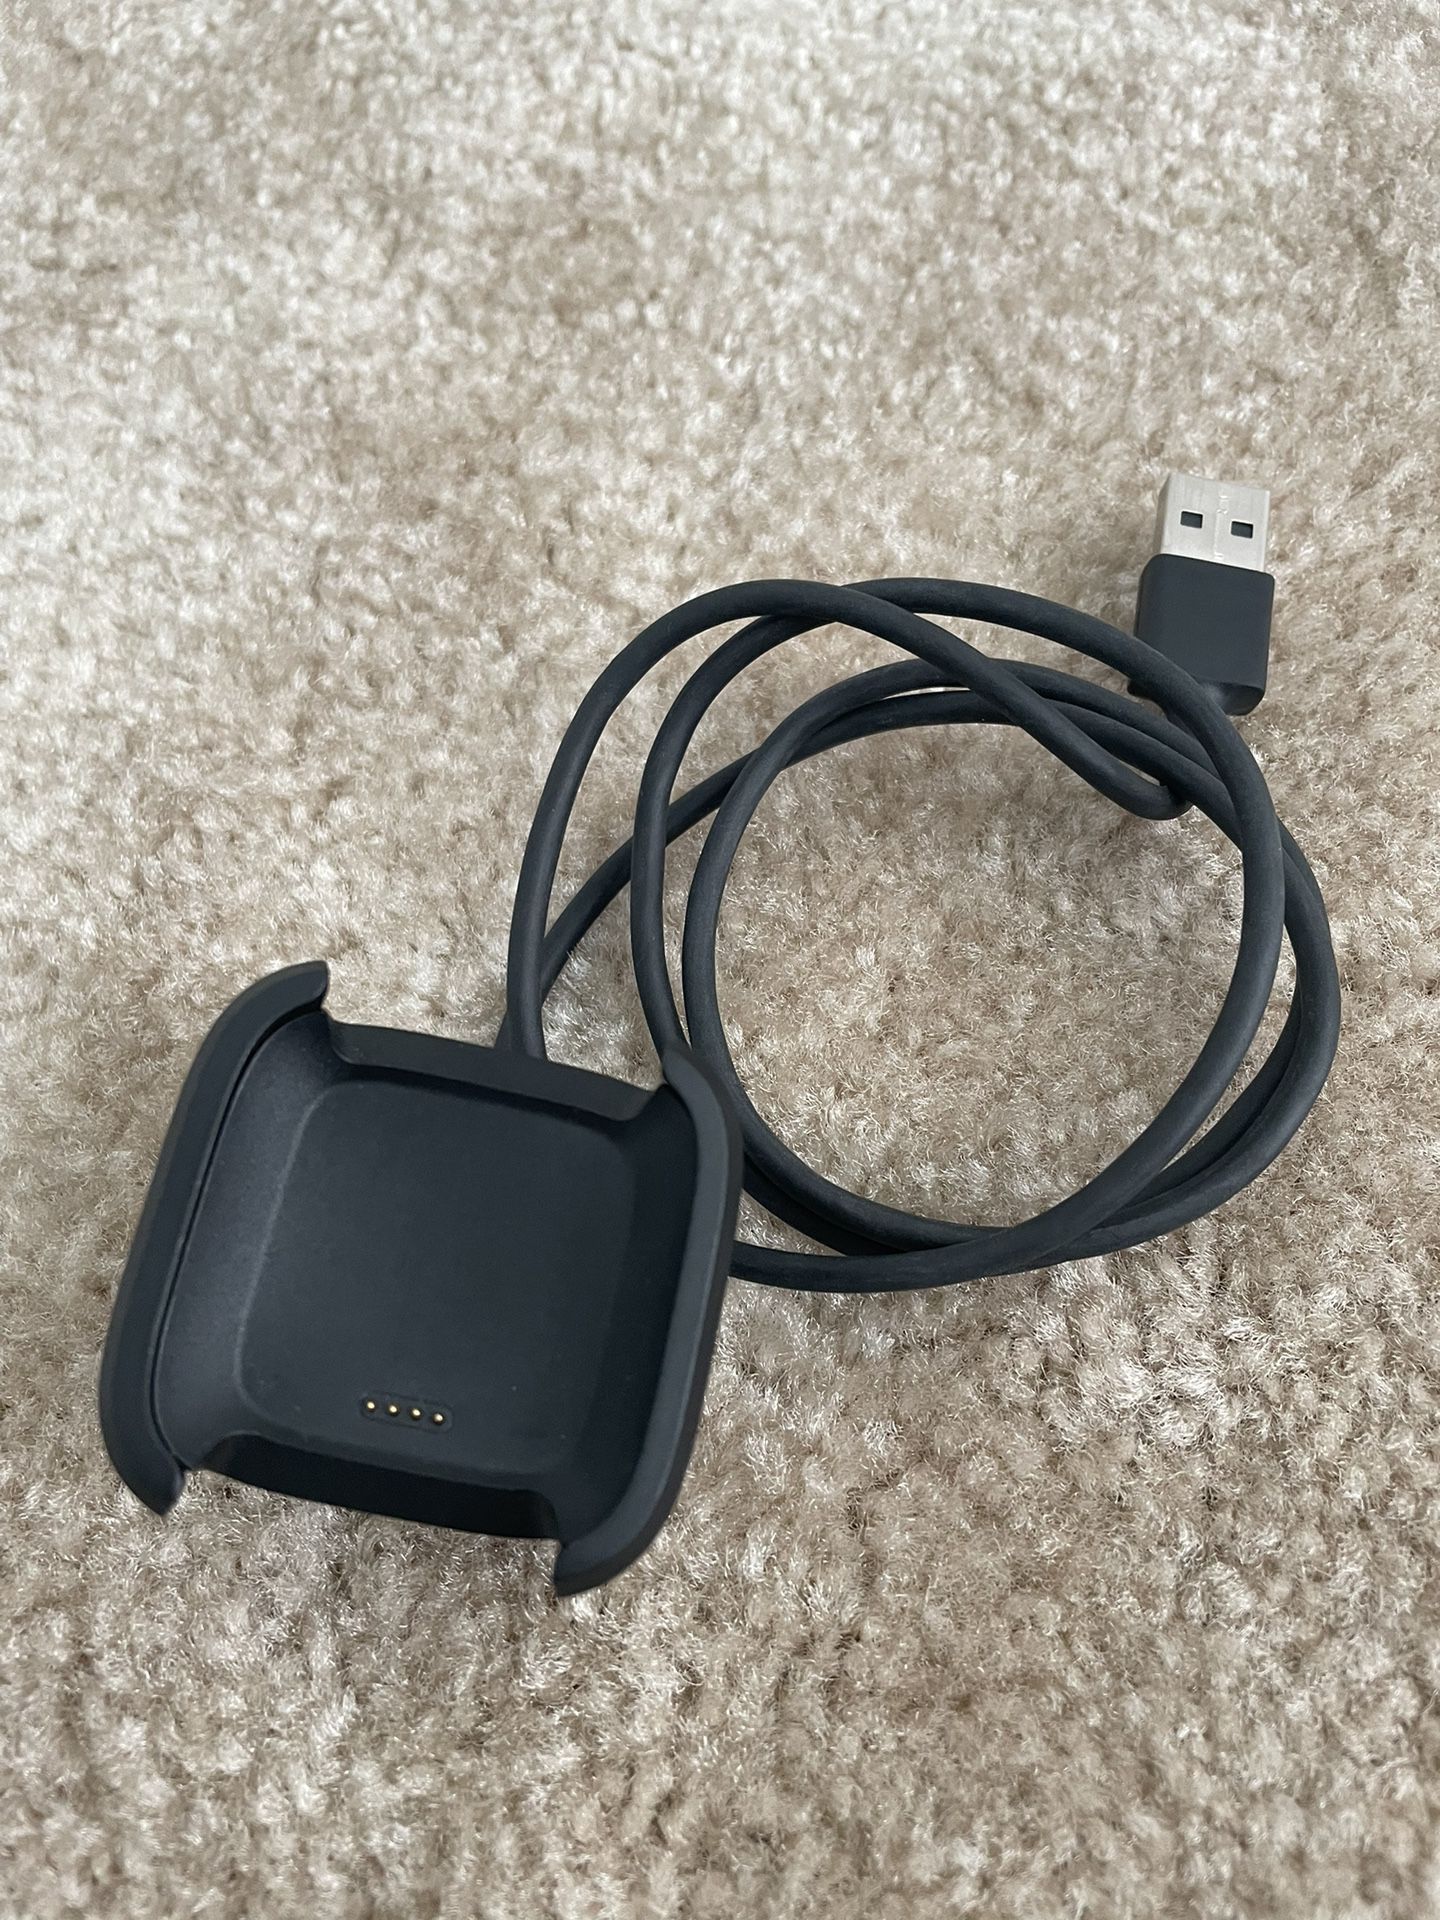 Fitbit Versa USB Charger